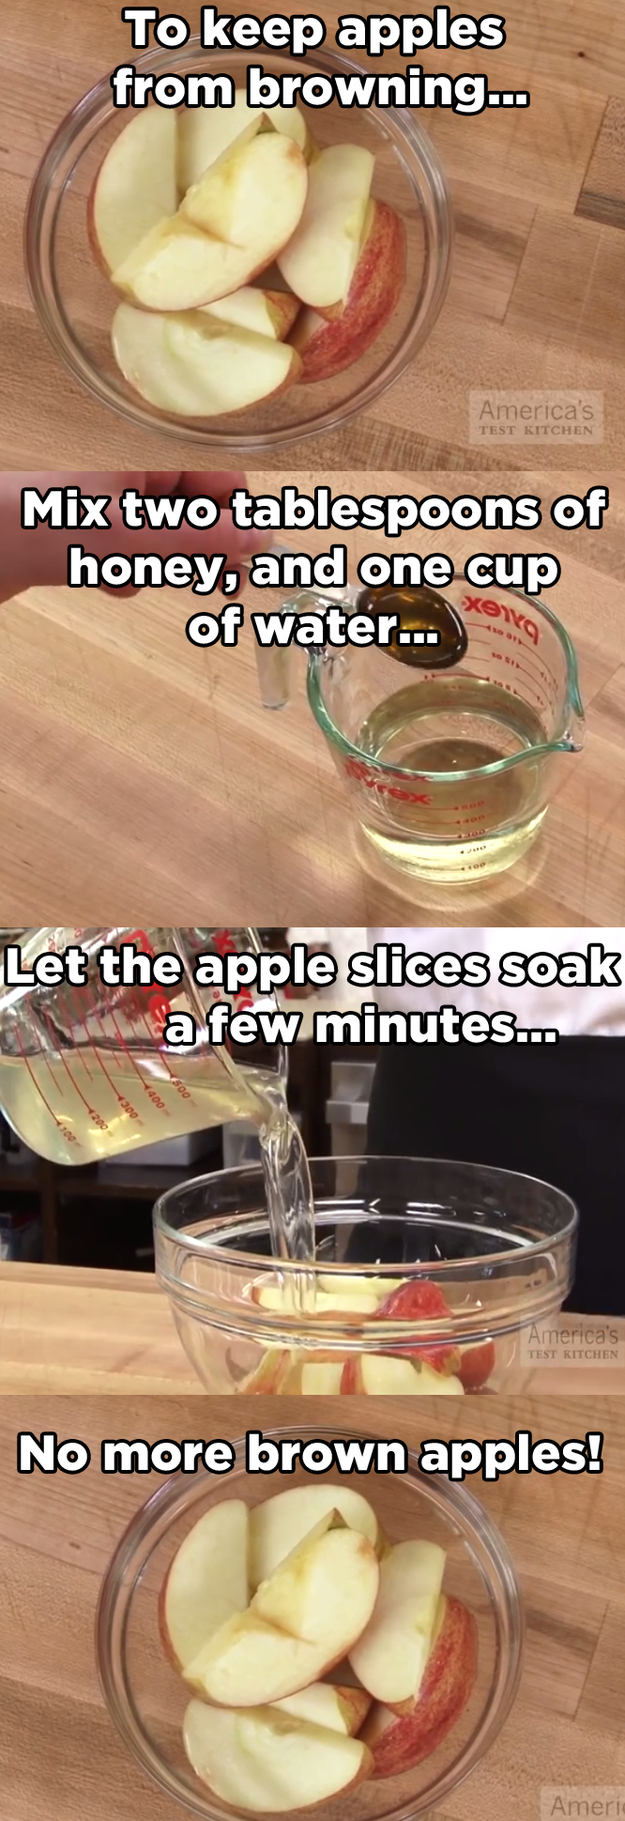 Awesome Fruit Hacks To Make Your Life Easier-02